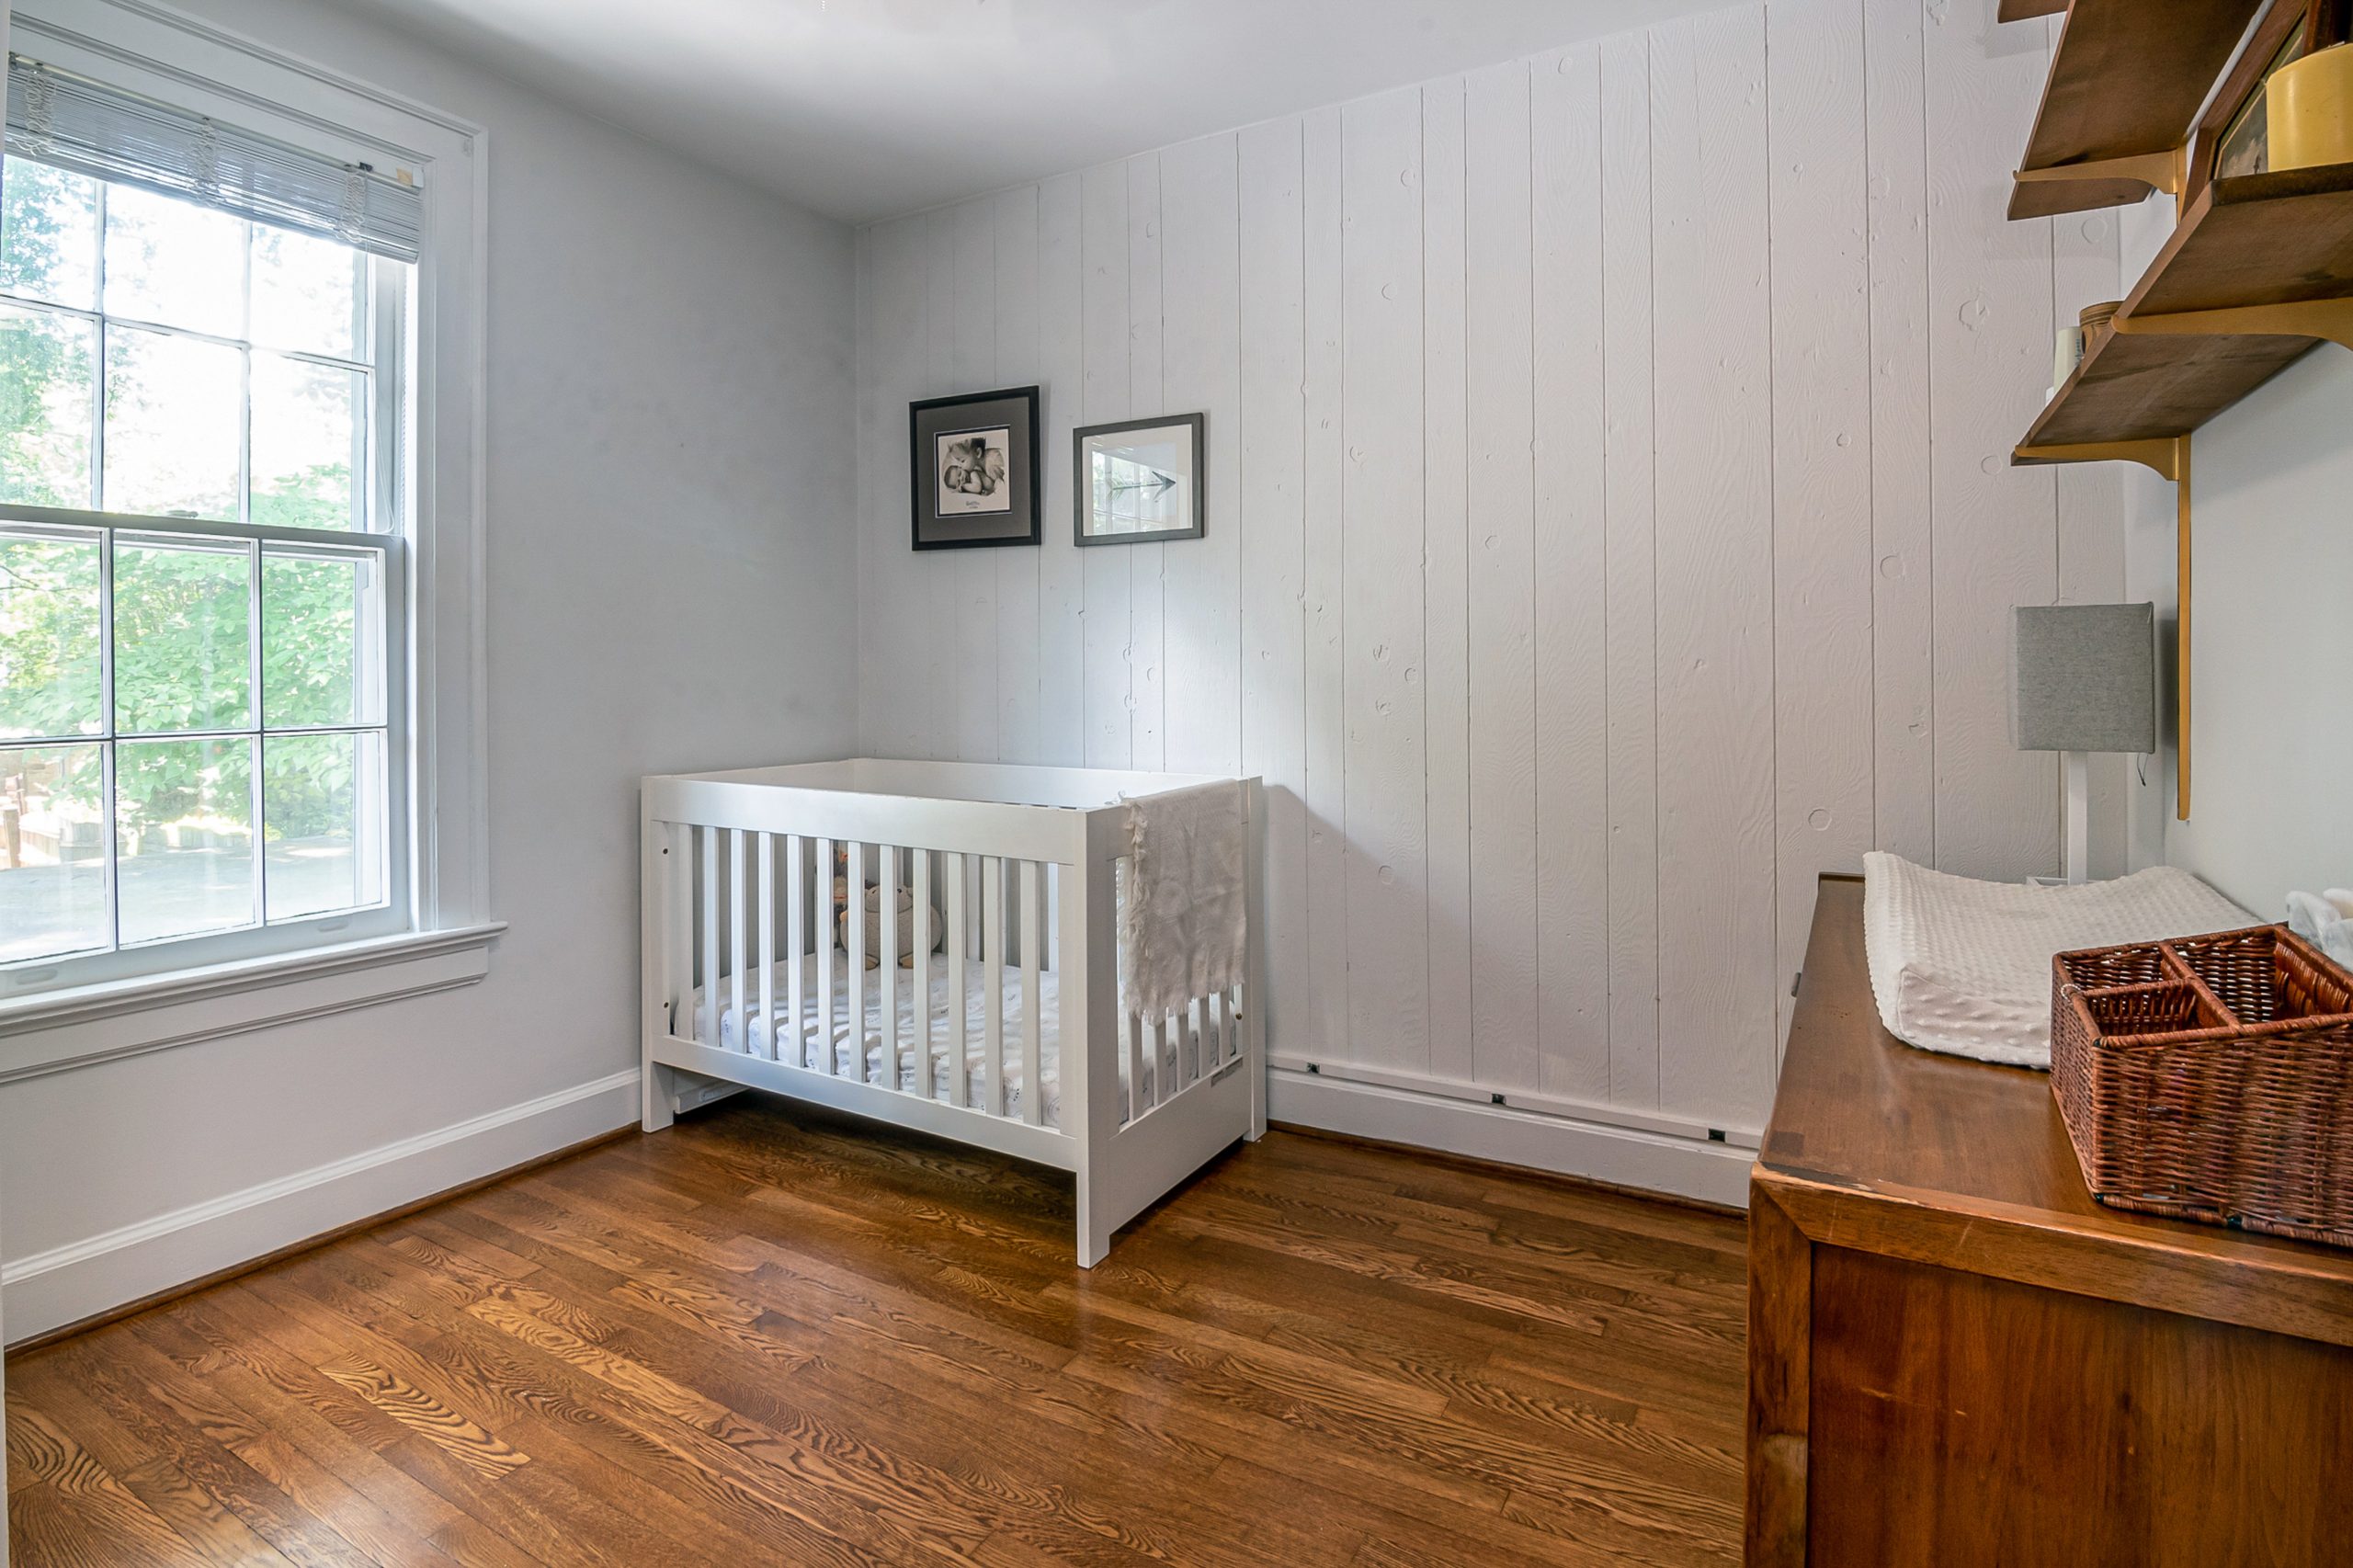 How to decorate a child’s room in the attic?